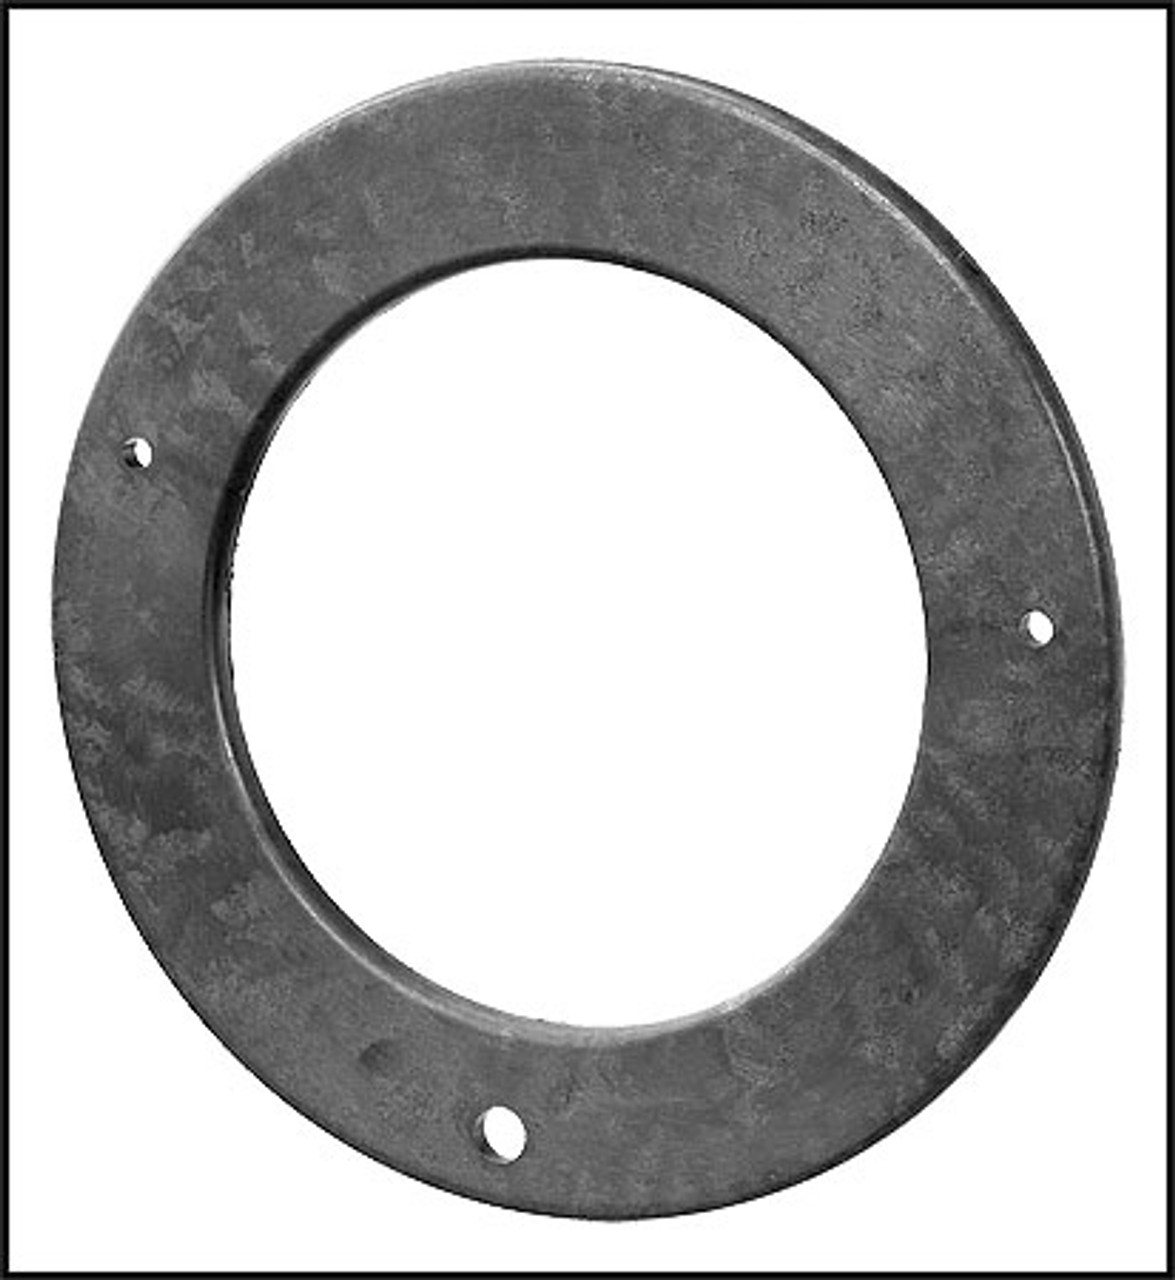 Pentair/PacFab Mounting Plate For 5 HP Challenger Pumps (#355495)